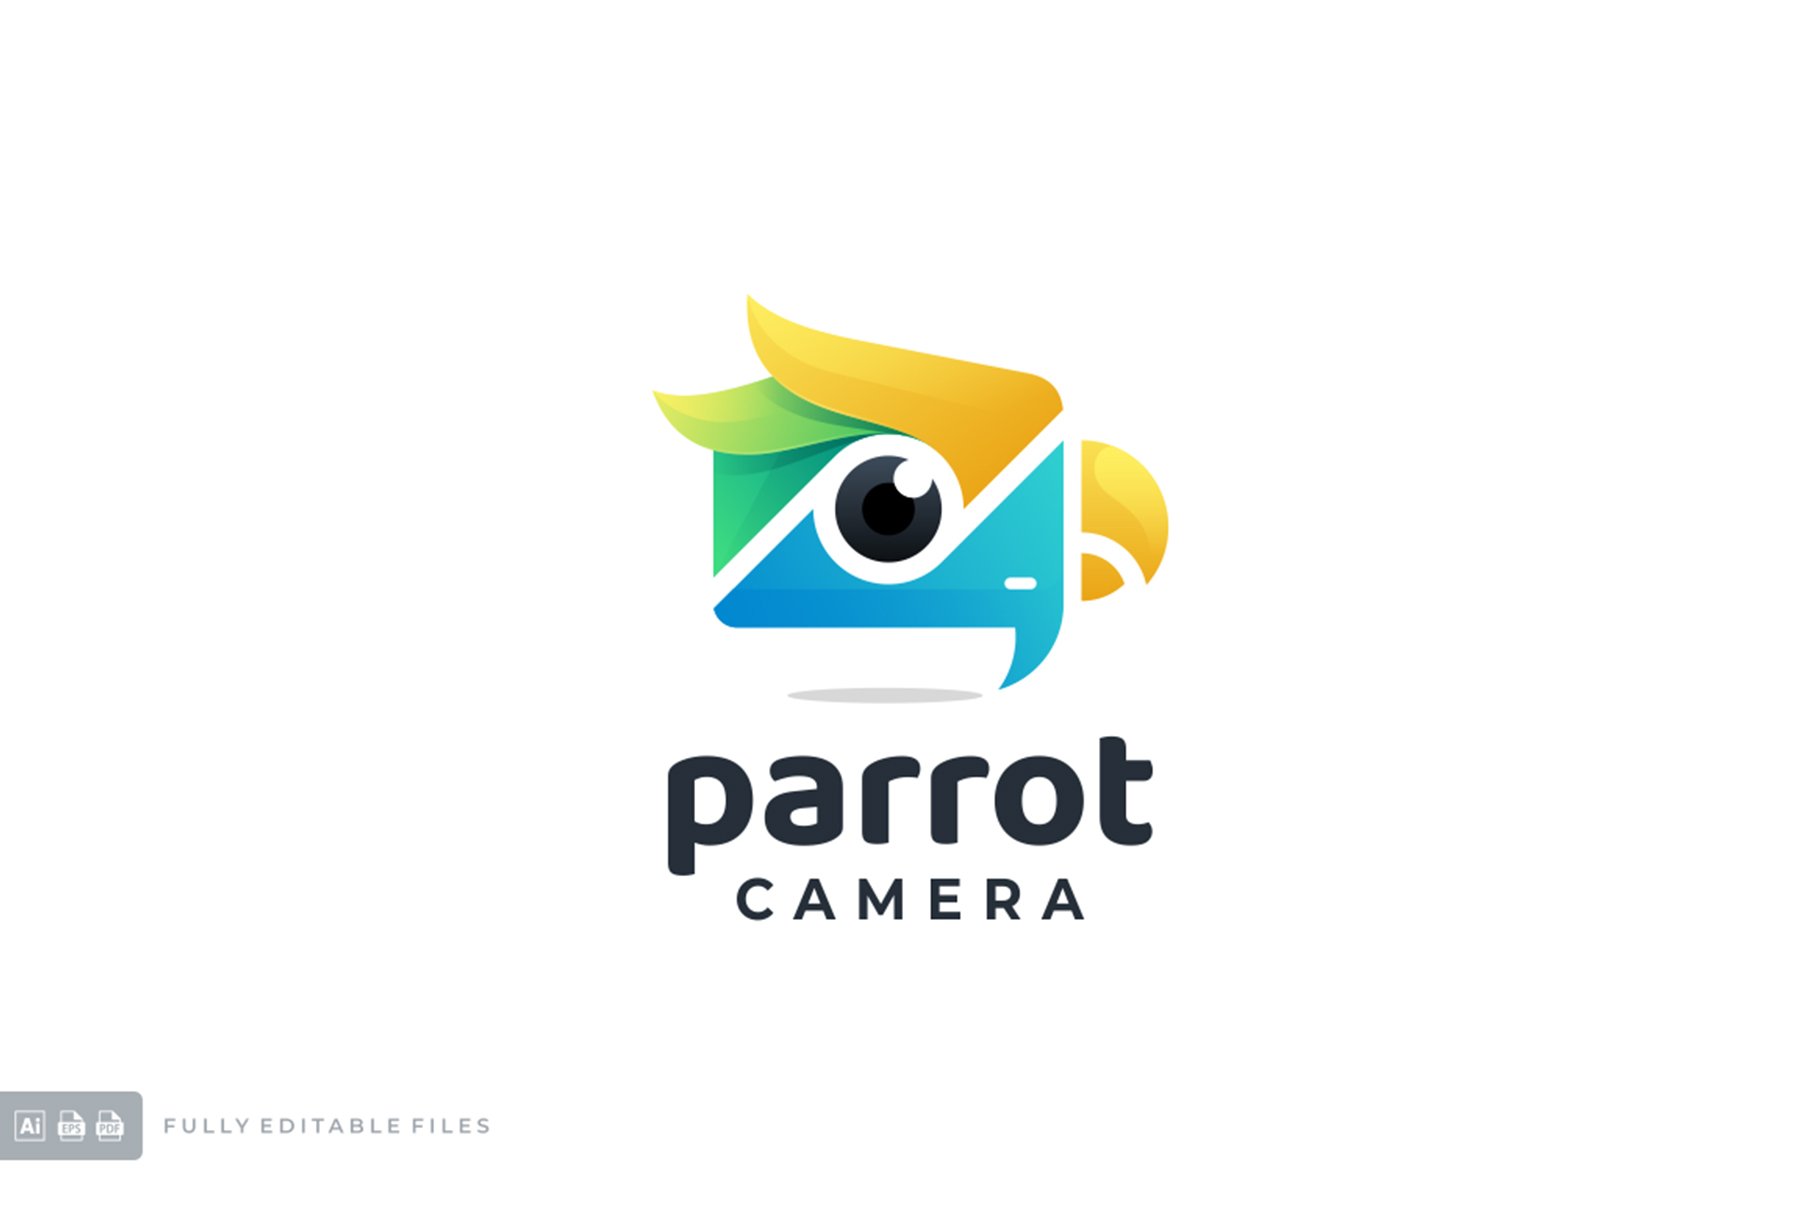 Parrot Camera Colorful Logo cover image.